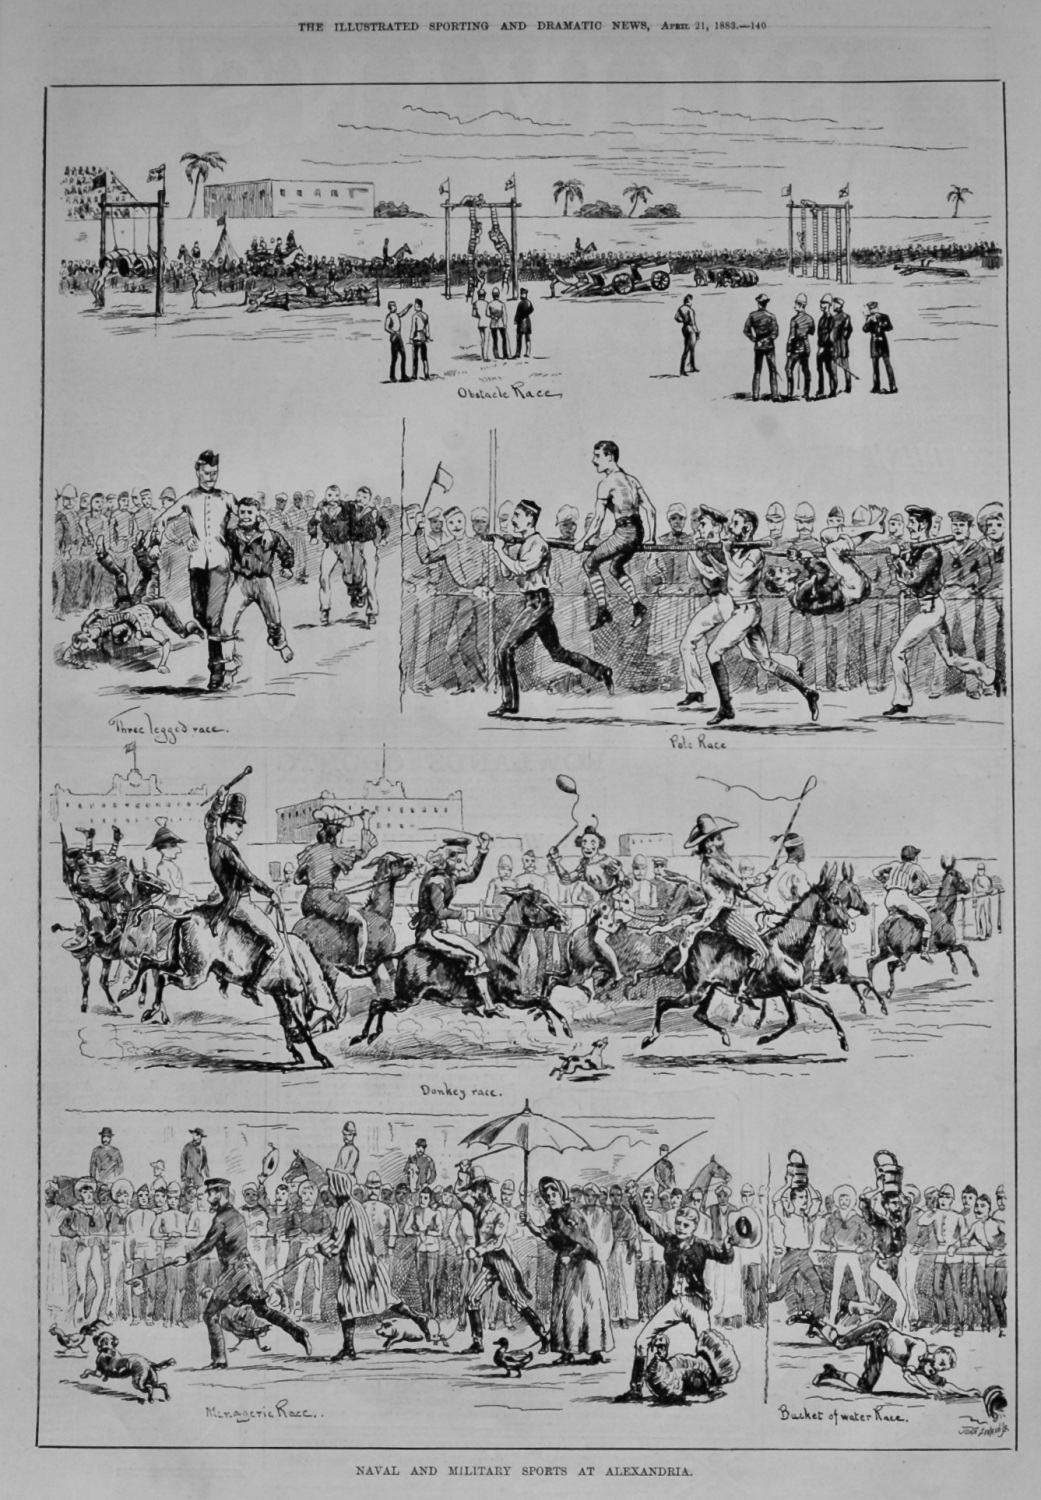 Naval and Military Sports at Alexandria.  1883.